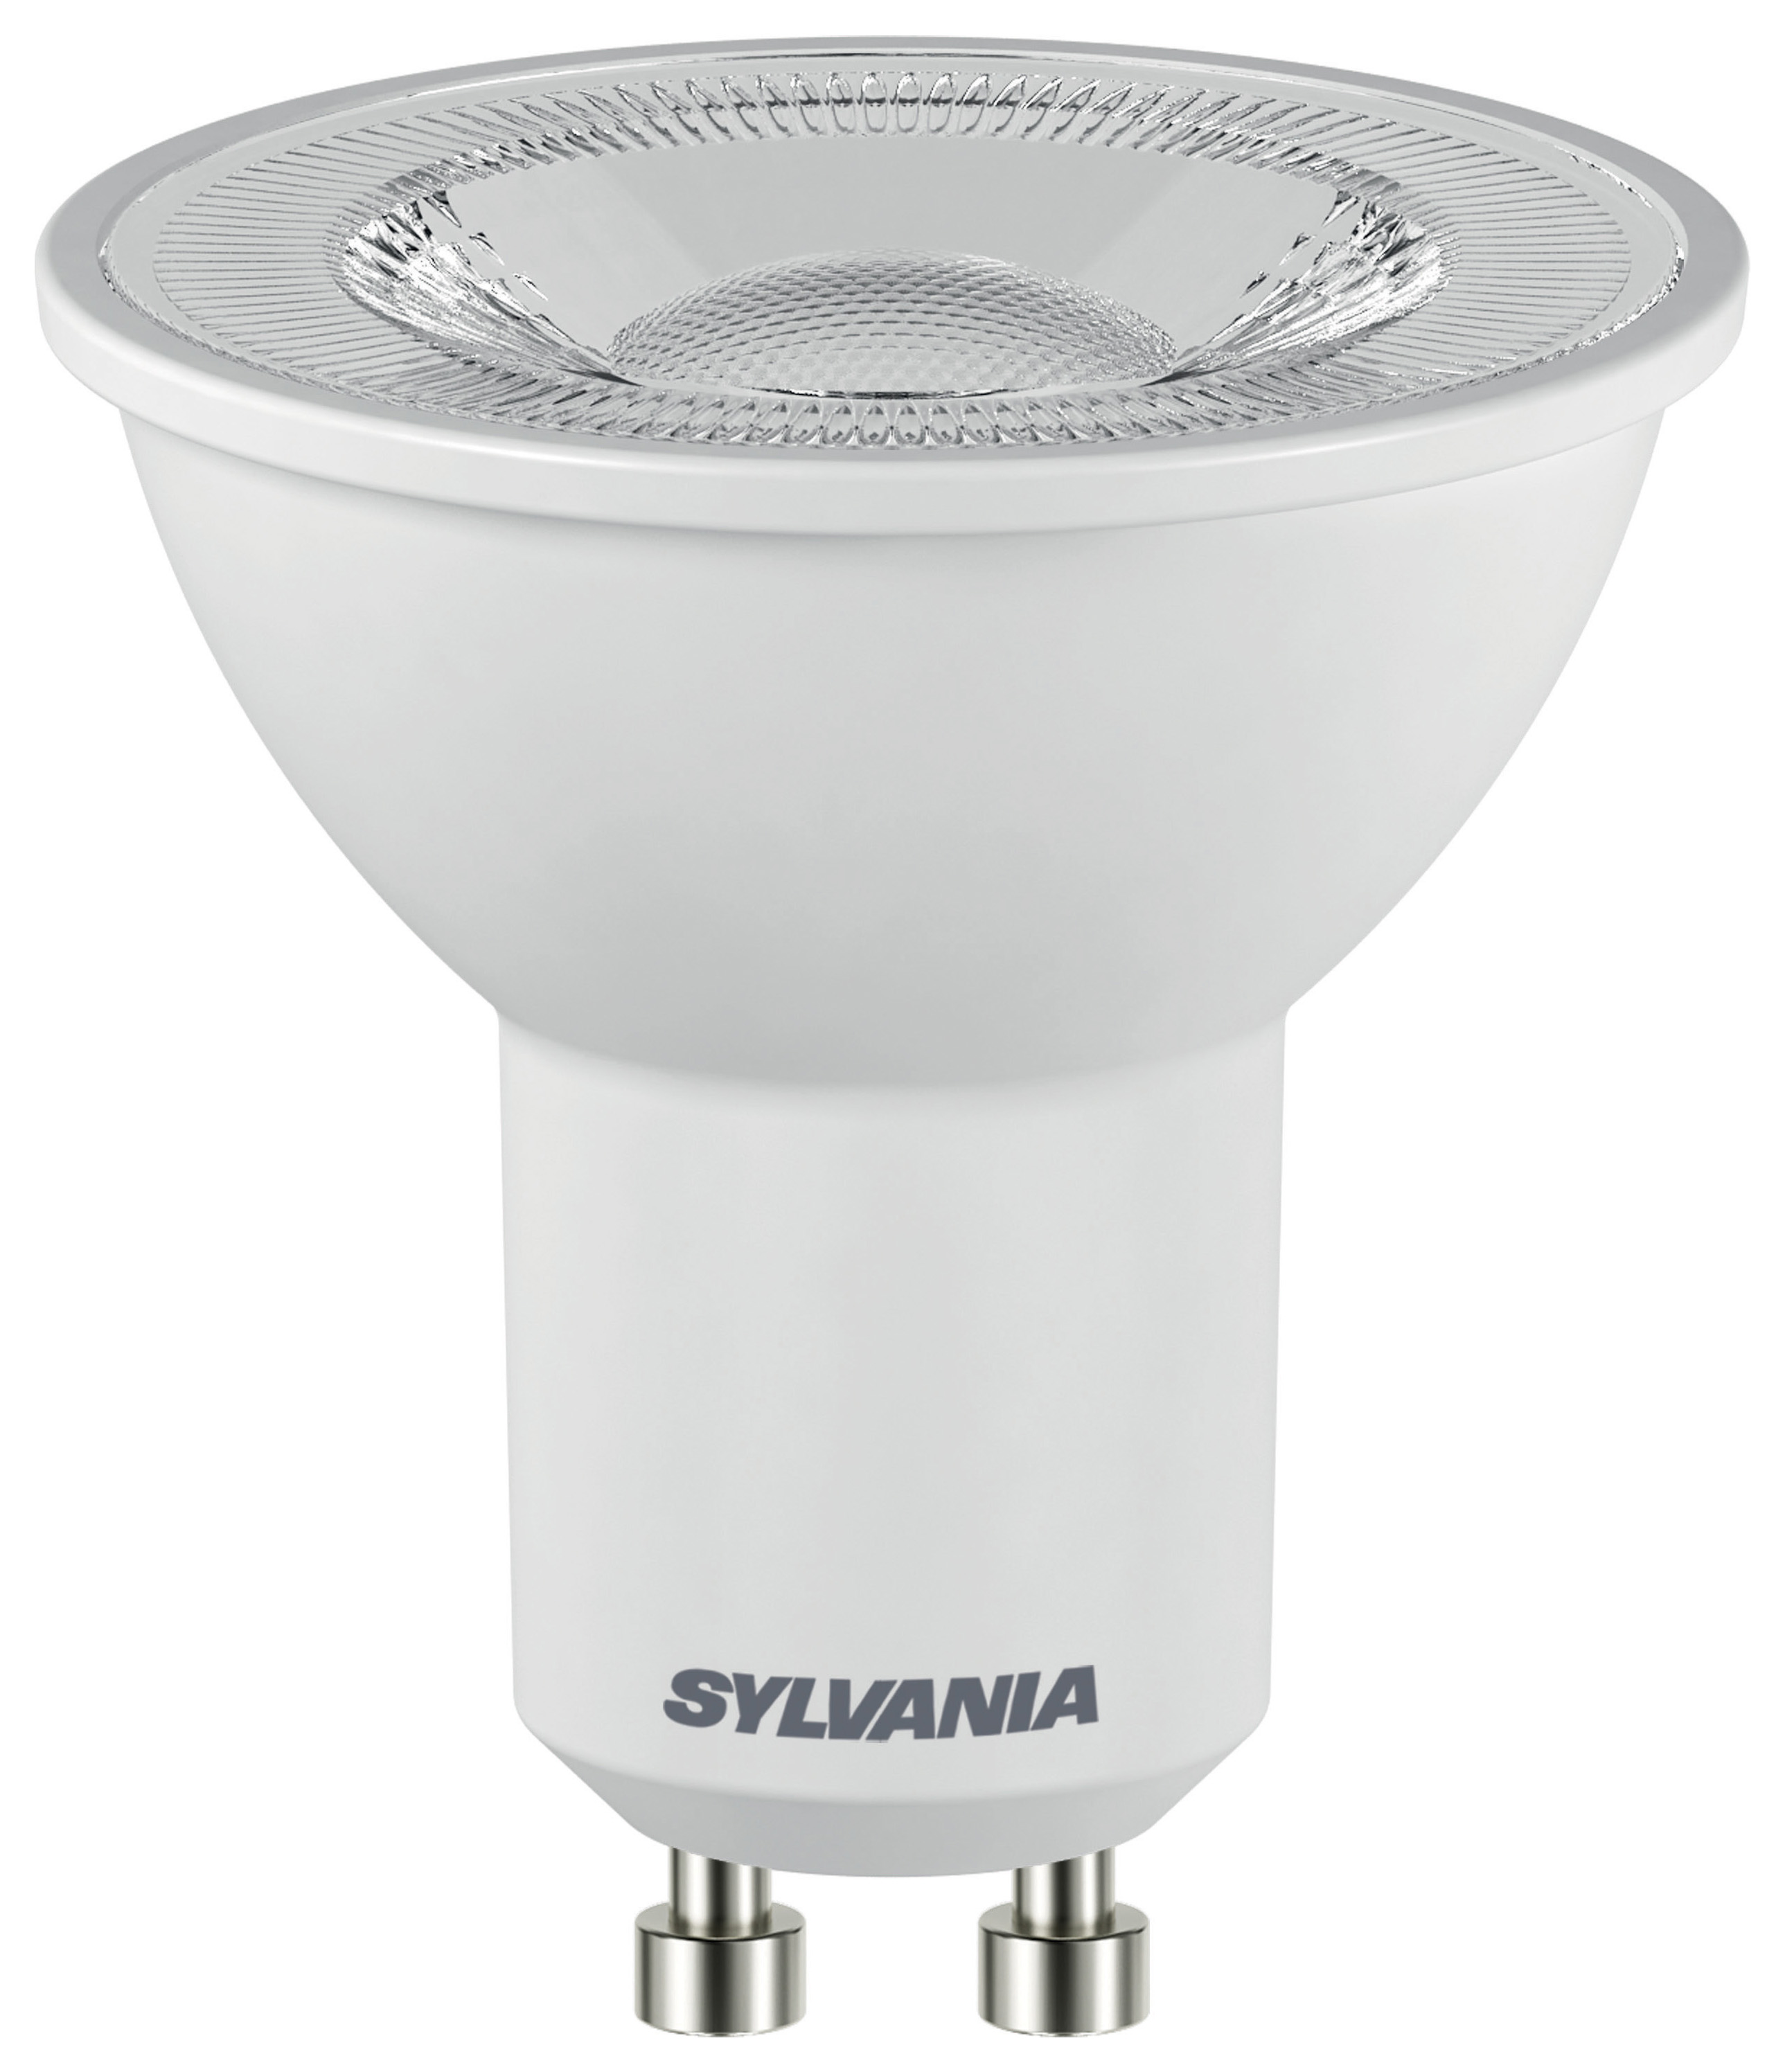 Sylvania Non-Dimmable LED GU10 4.2W Warm White Light Bulb - Pack of 10